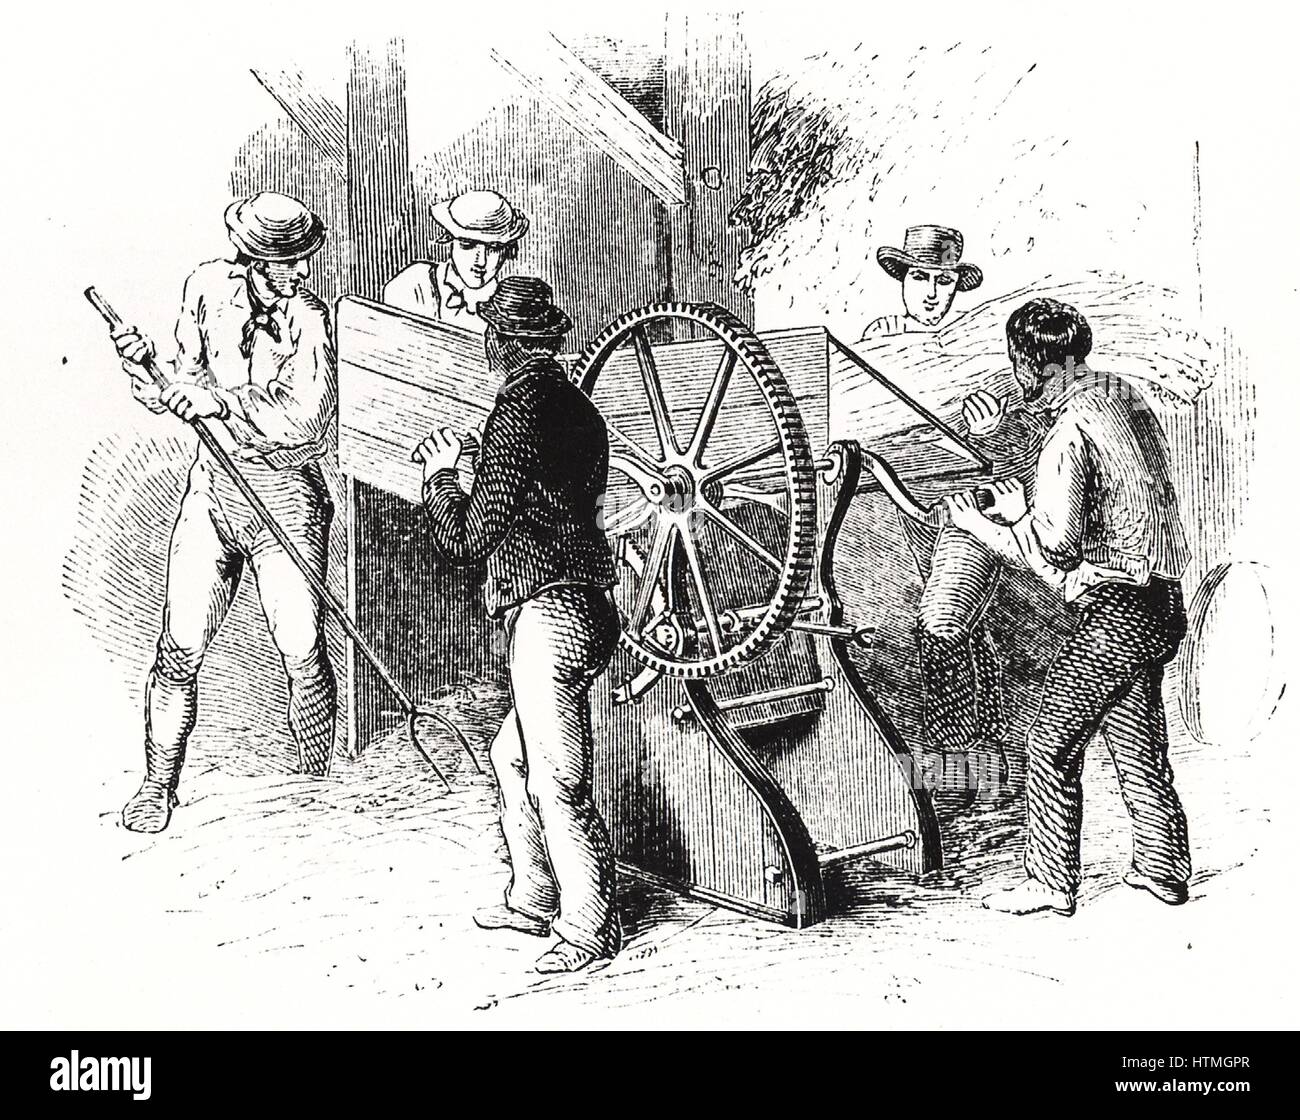 Hand-powered threshing machine by Barrett, Exall & Andrews. These machines were more efficient than the traditional threshing with flails, the labour-intensive winter occupation of farm labourers. Engraving c1850. Stock Photo